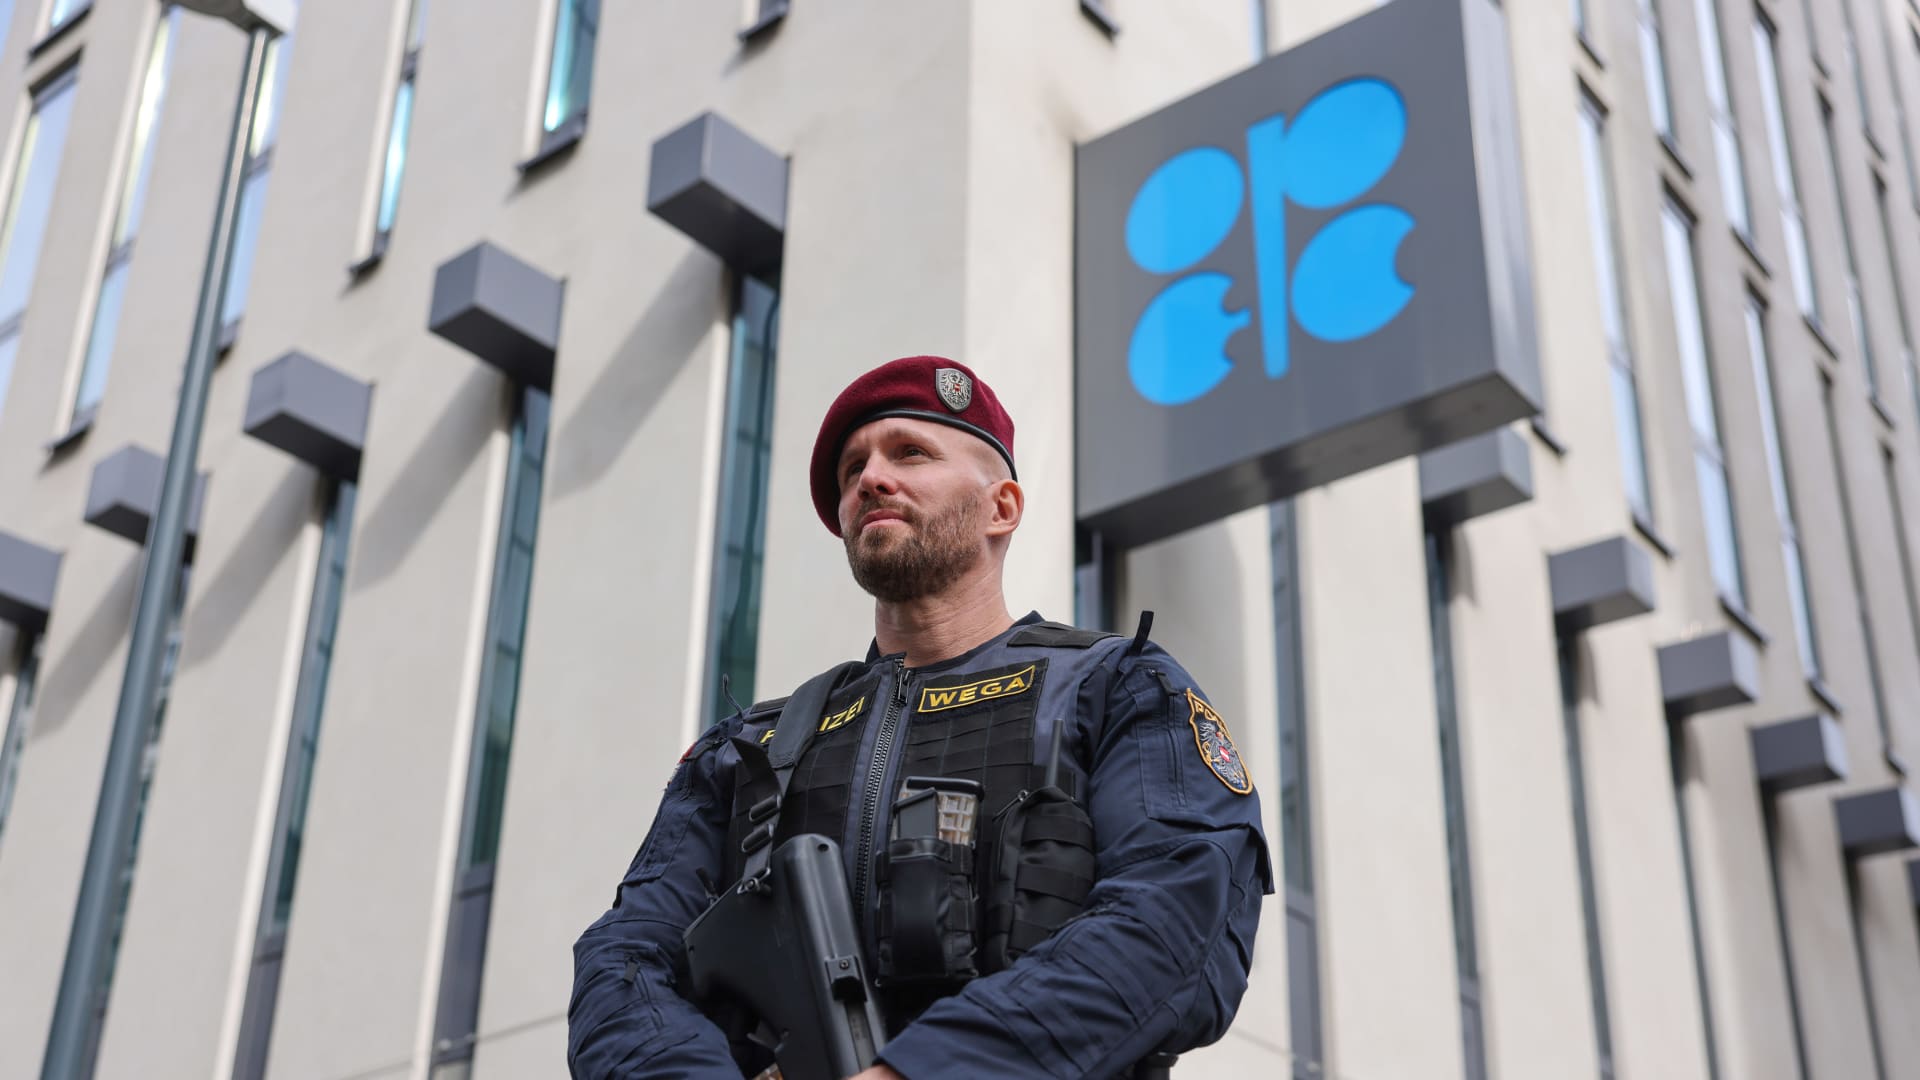 It is time to use an ‘all of the above’ energy policy to break the OPEC+ cartel